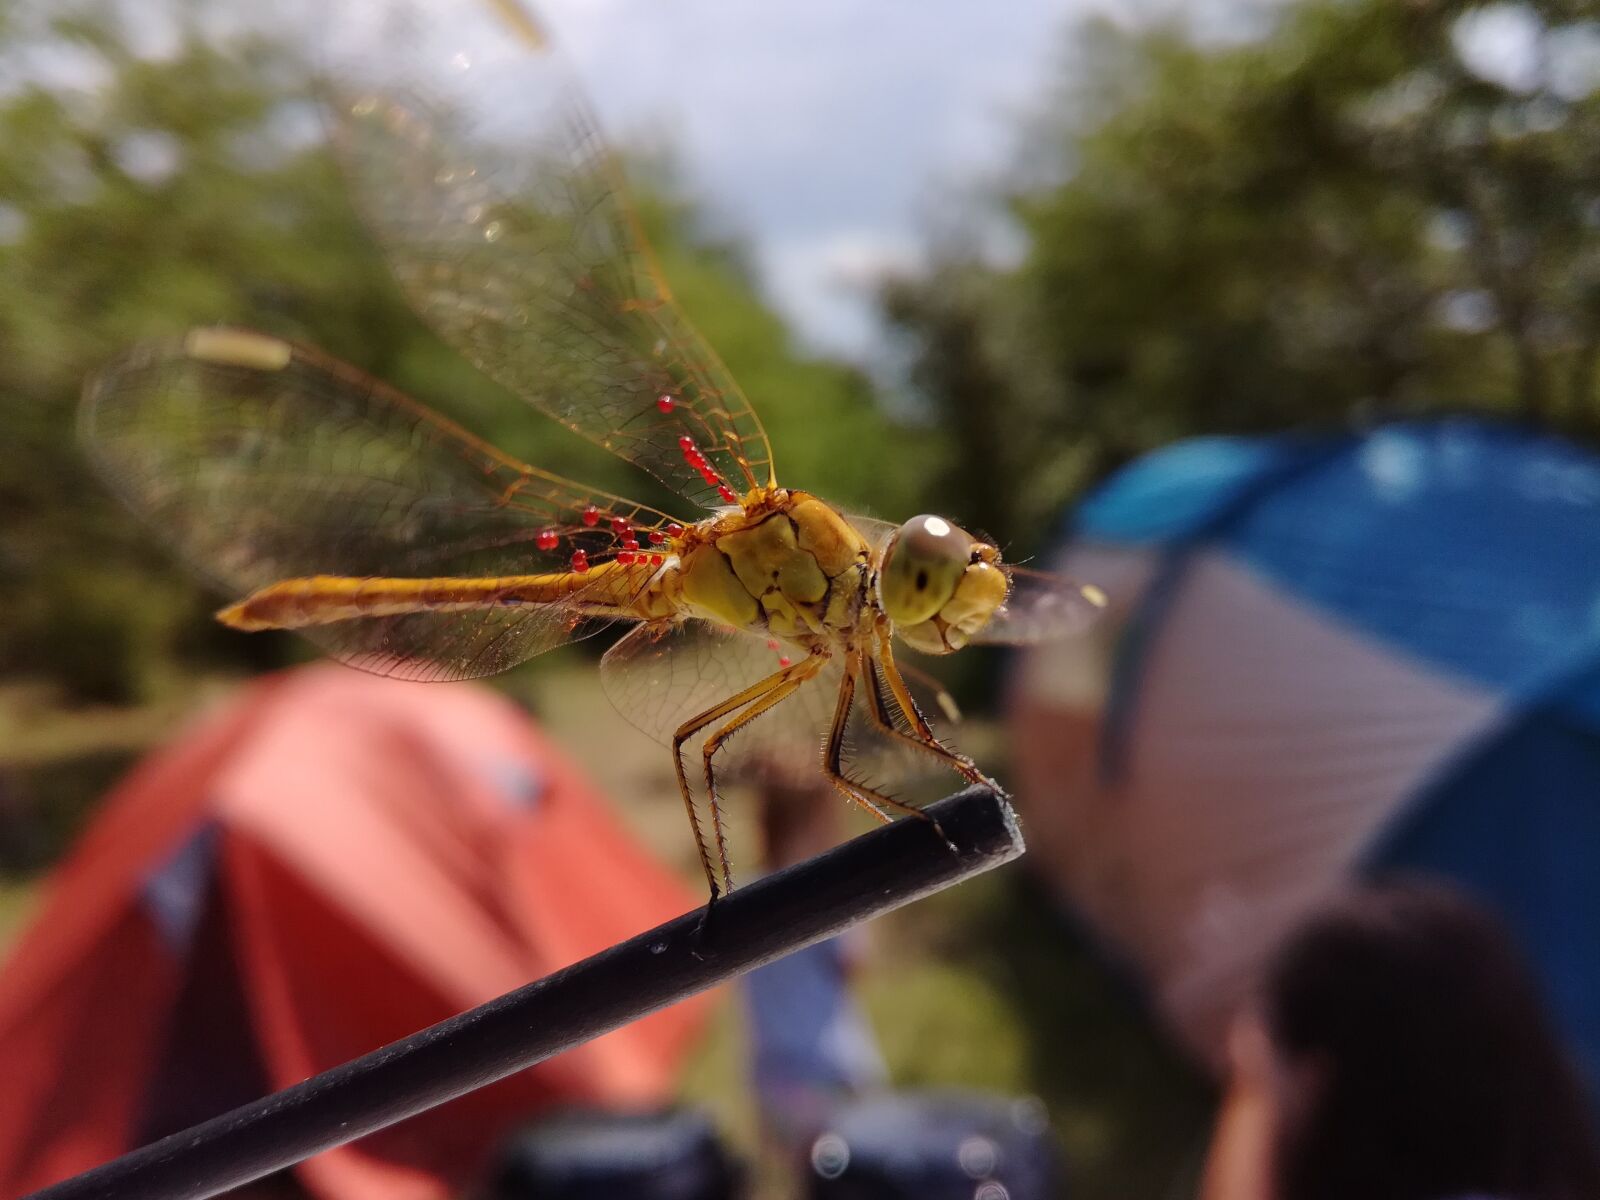 HUAWEI Honor 5C sample photo. Dragonfly, outdoor, wildlife photography